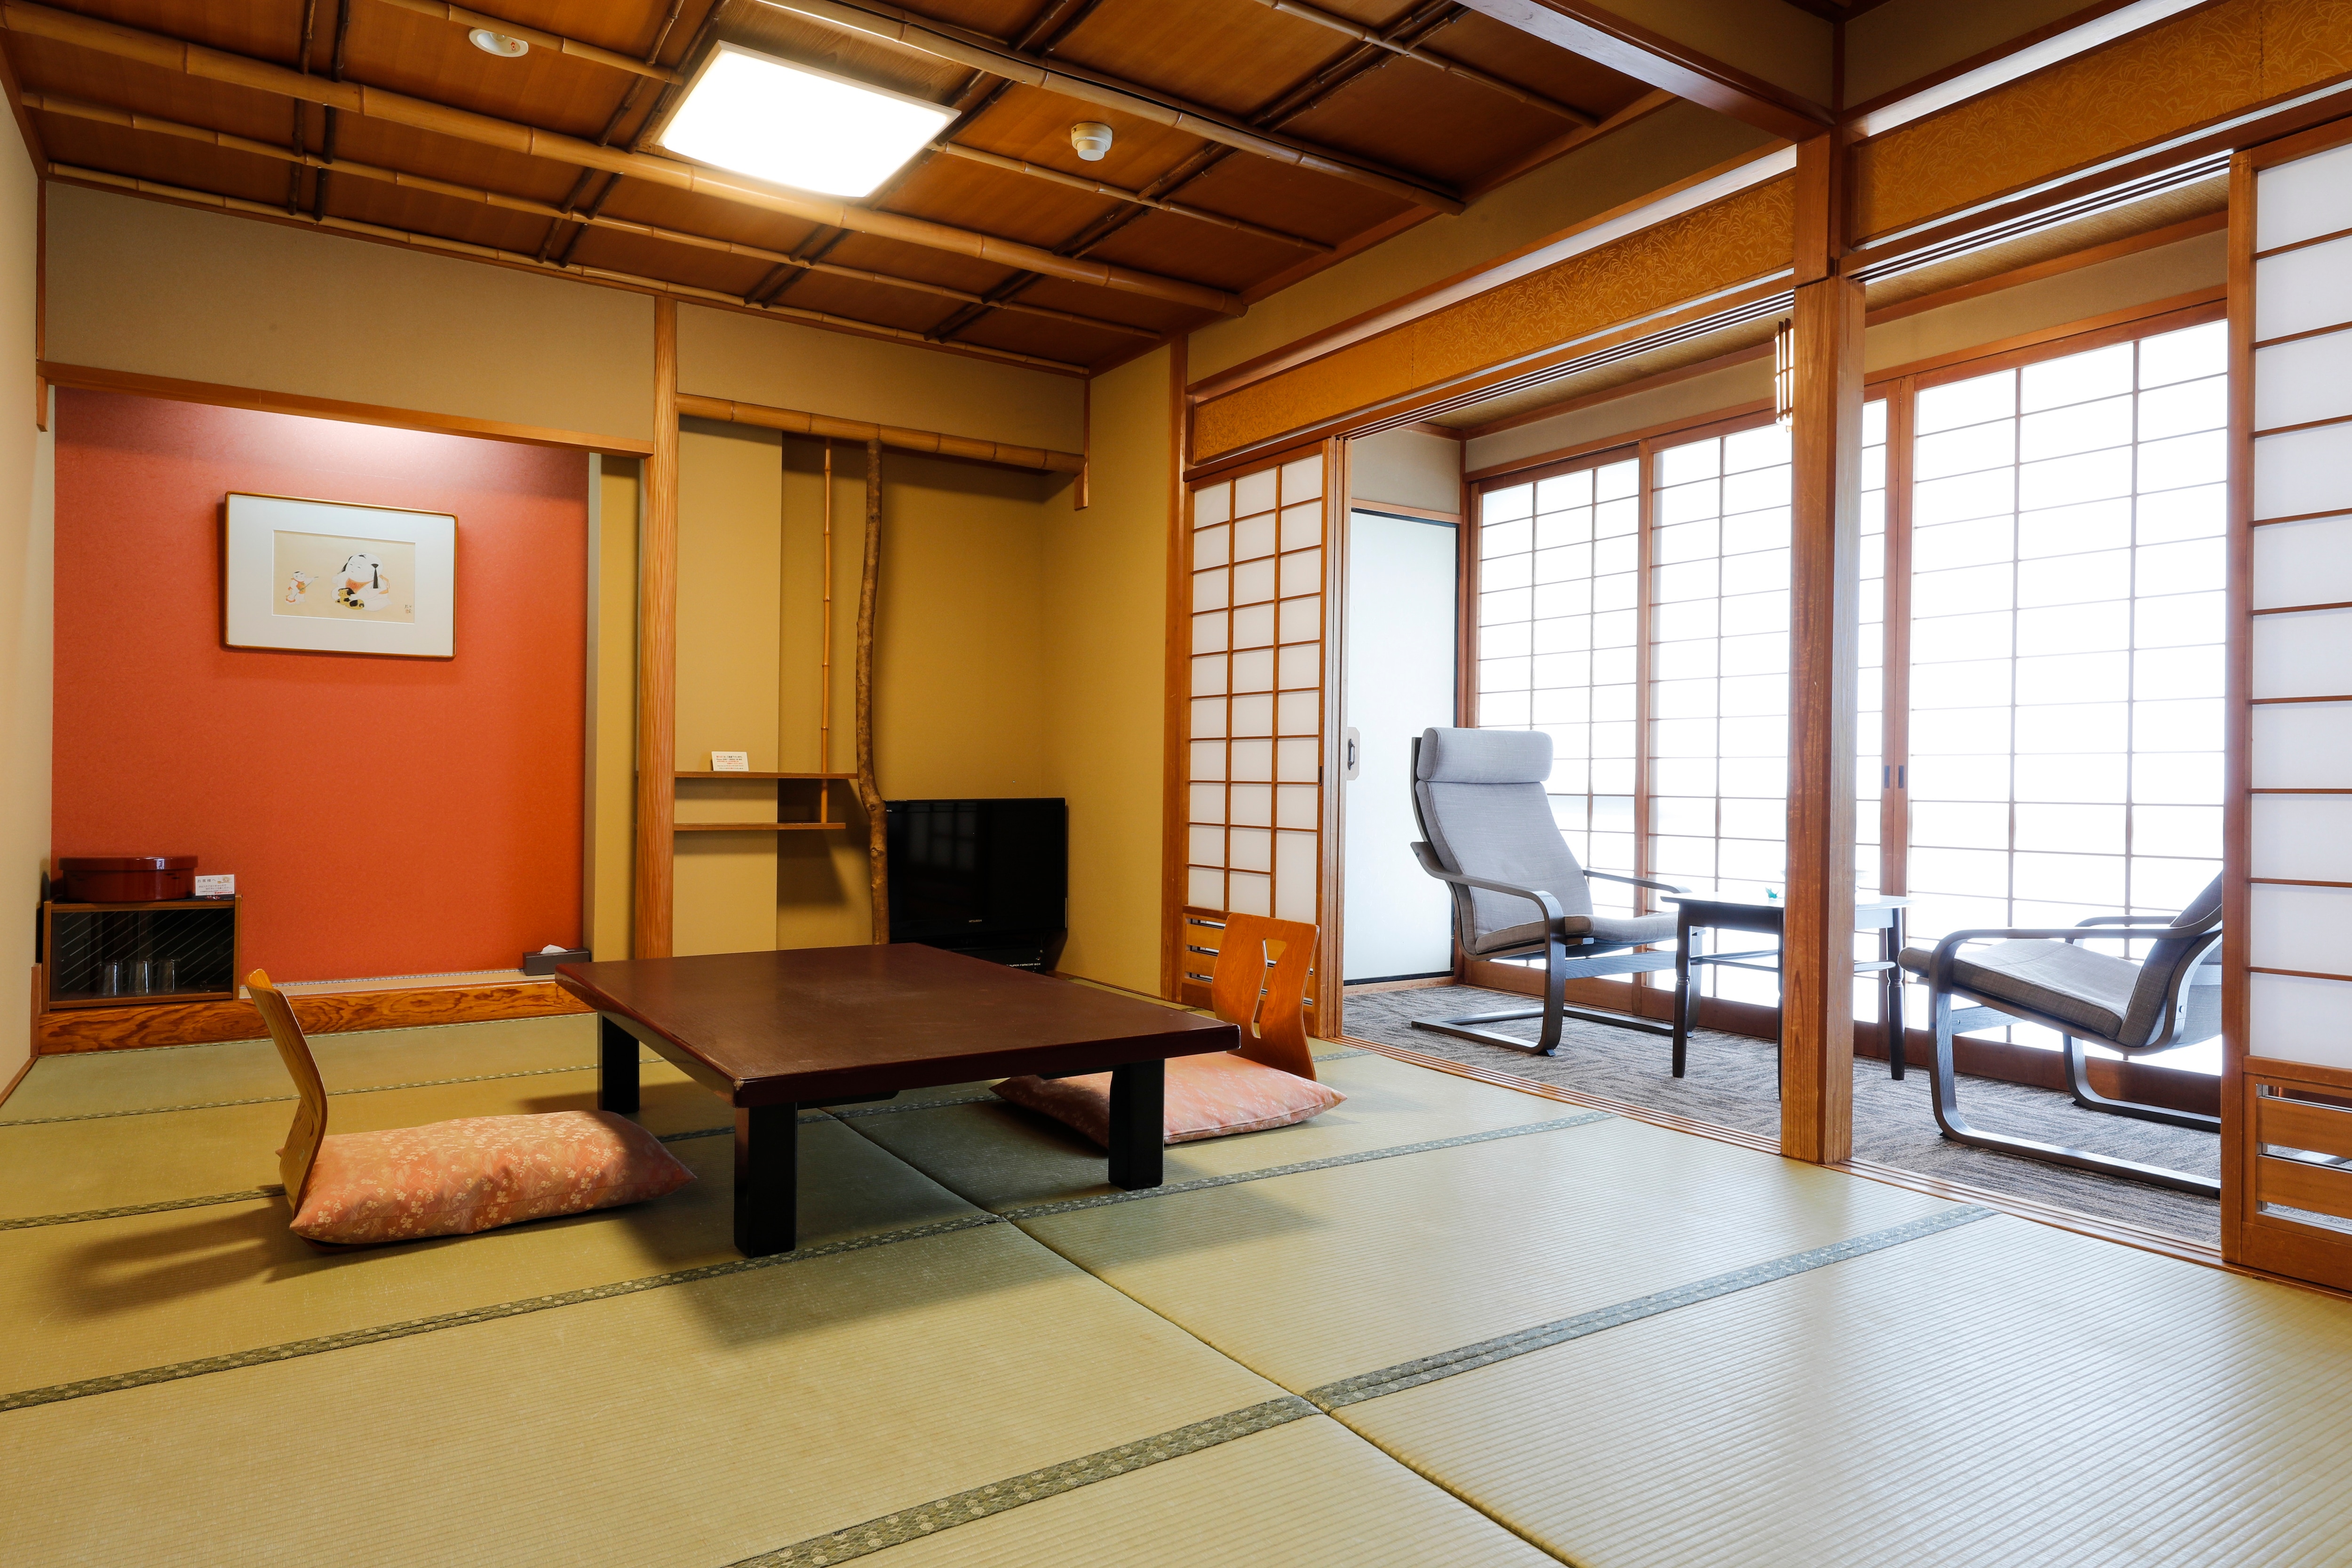 With 10 tatami bath and toilet